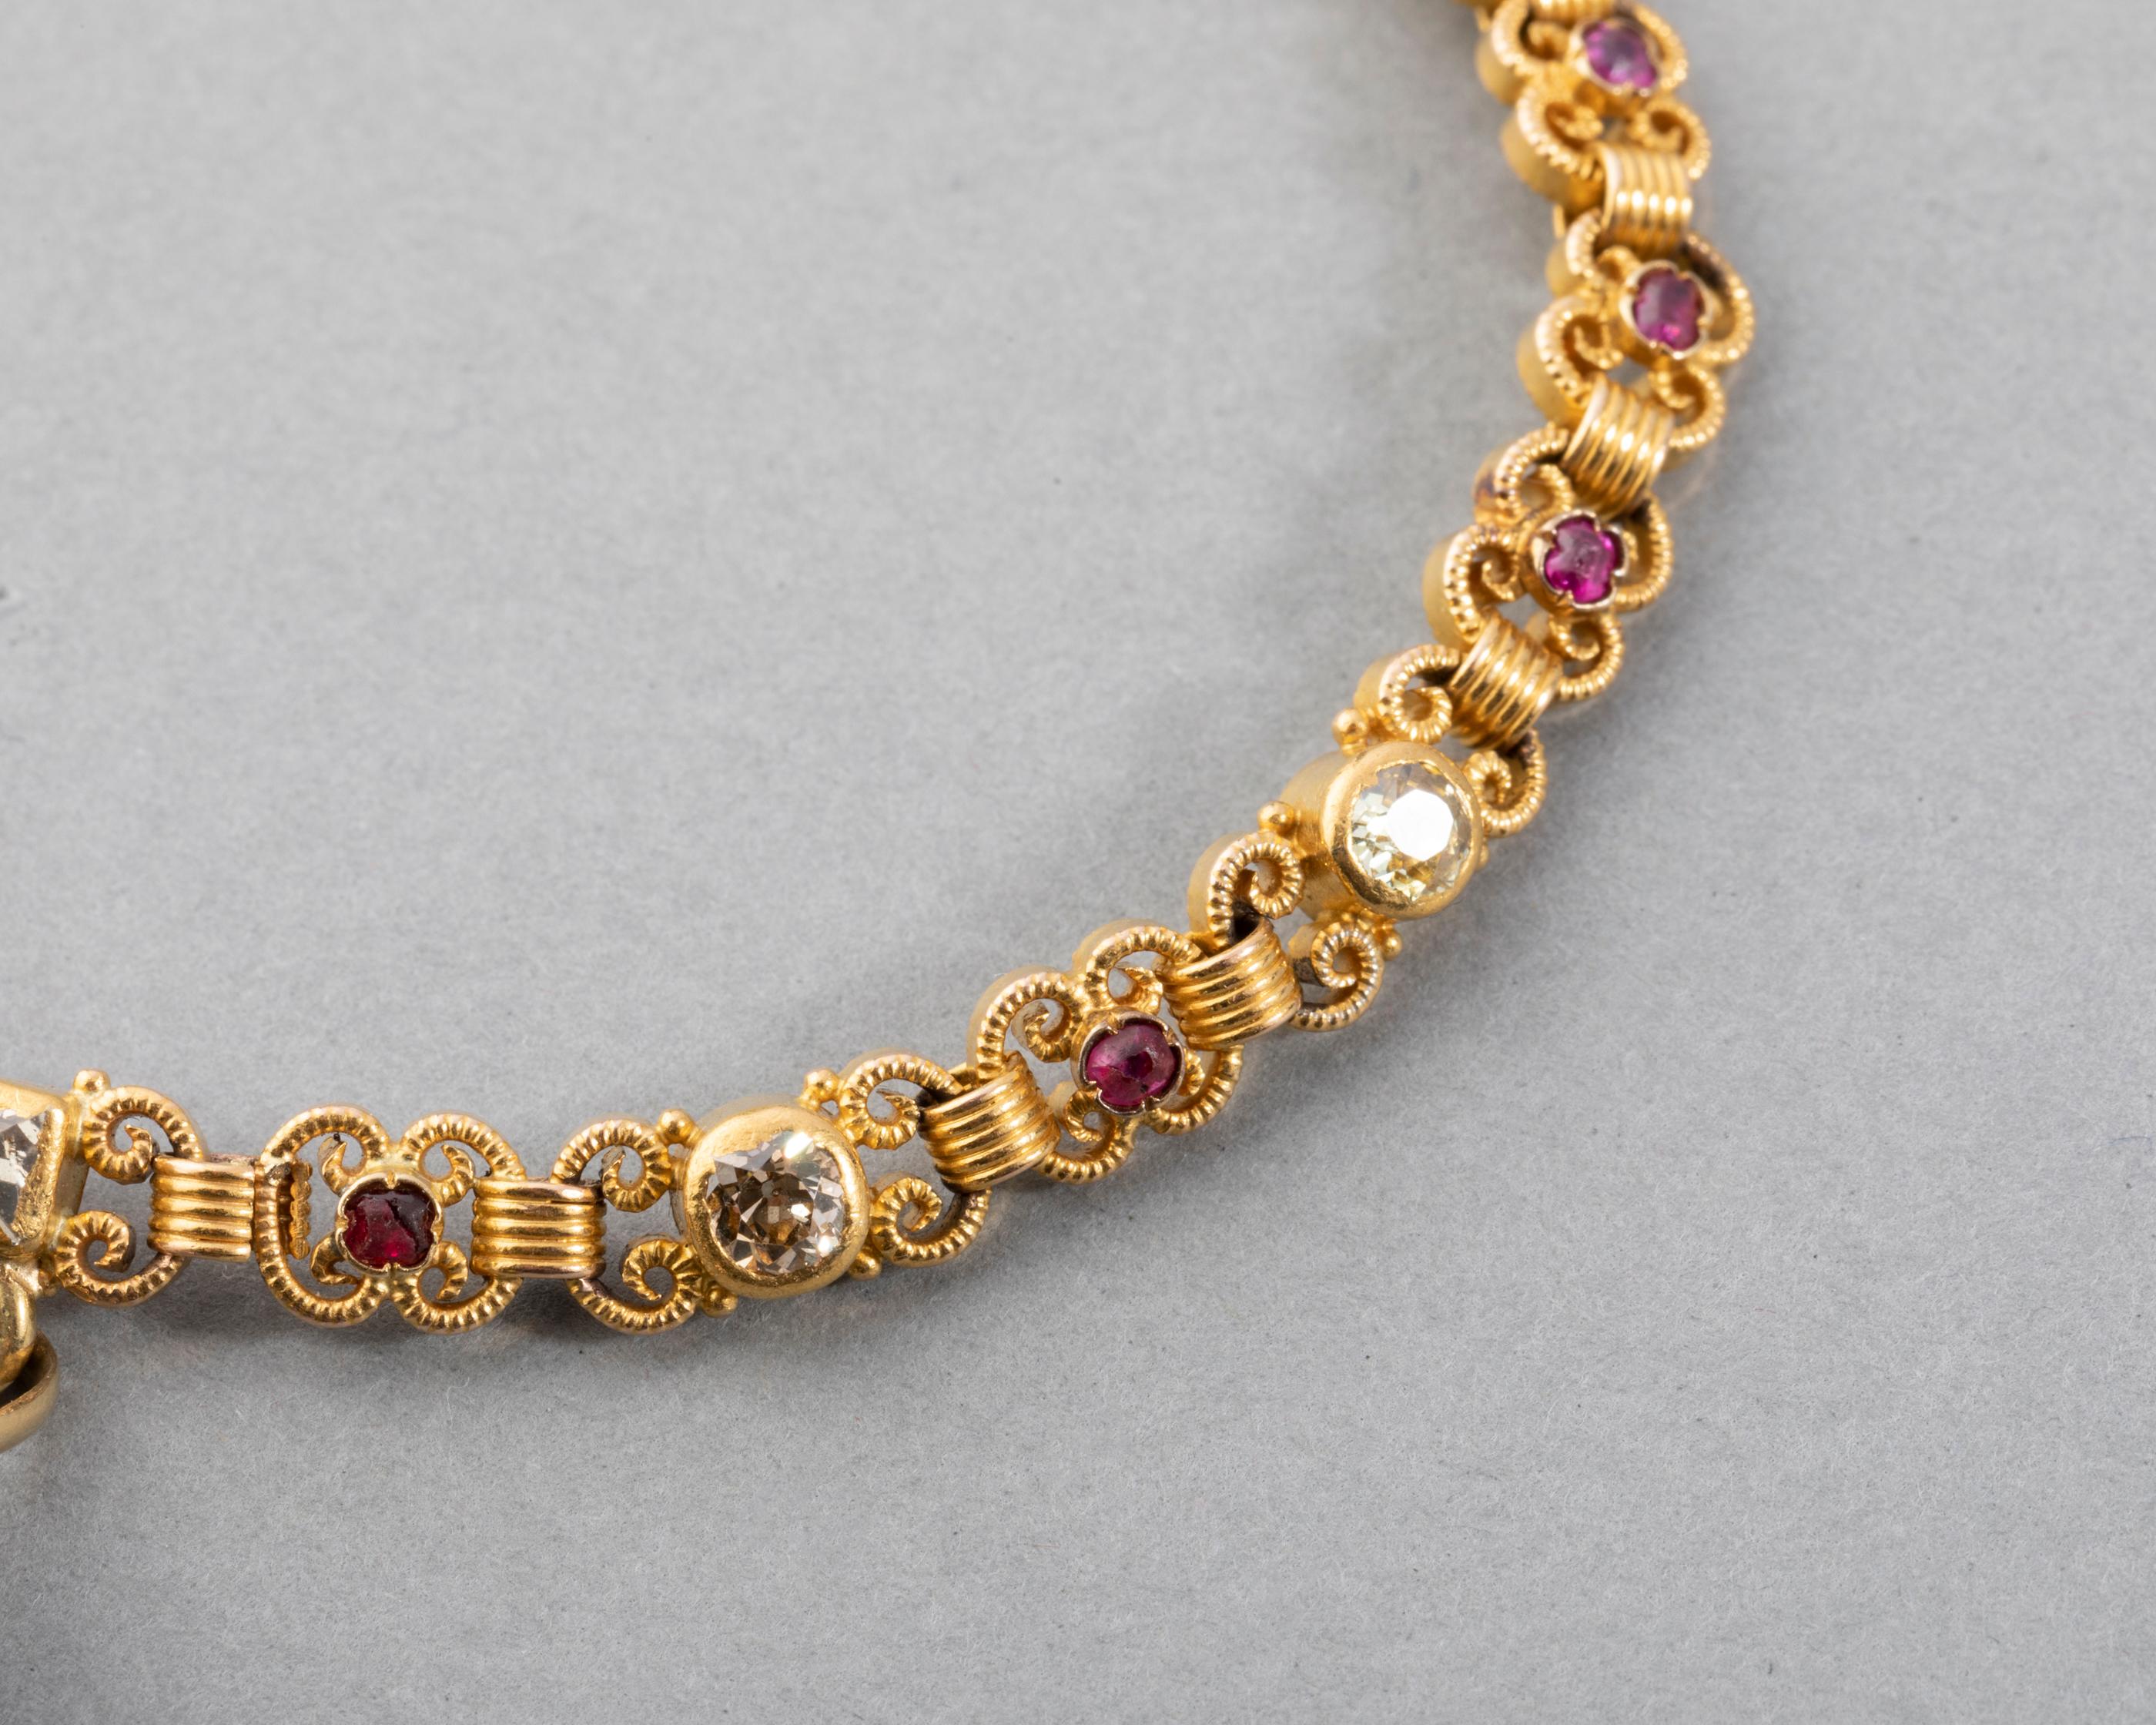 Old Mine Cut Antique 19th Century Gold and Precious Stones French Bracelet